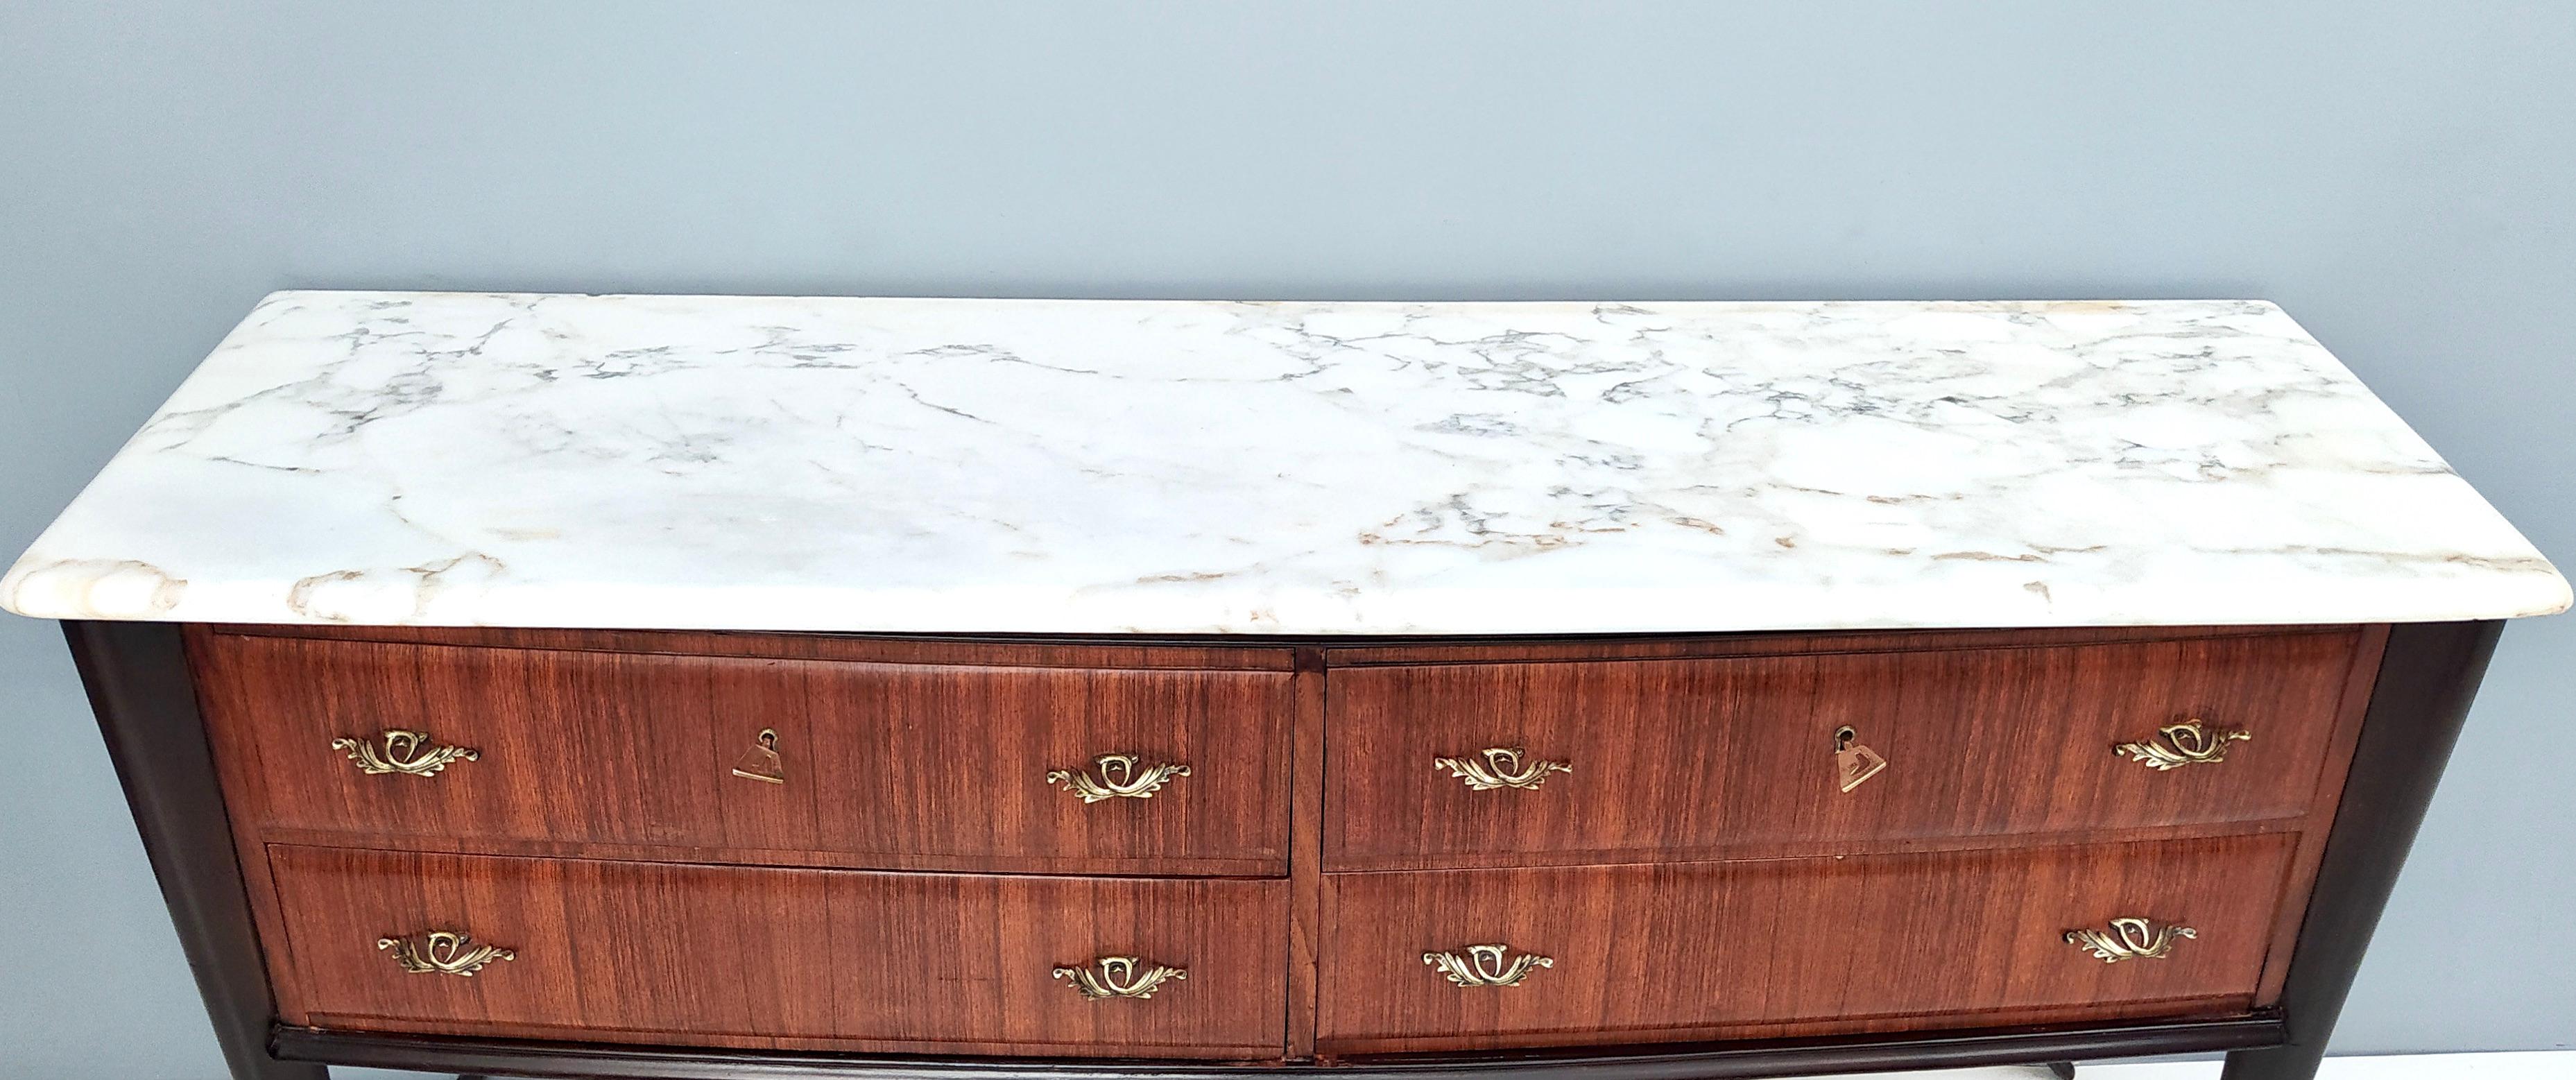 Vintage Black Walnut Dresser Produced by Dassi with Carrara Marble Top, Italy For Sale 8